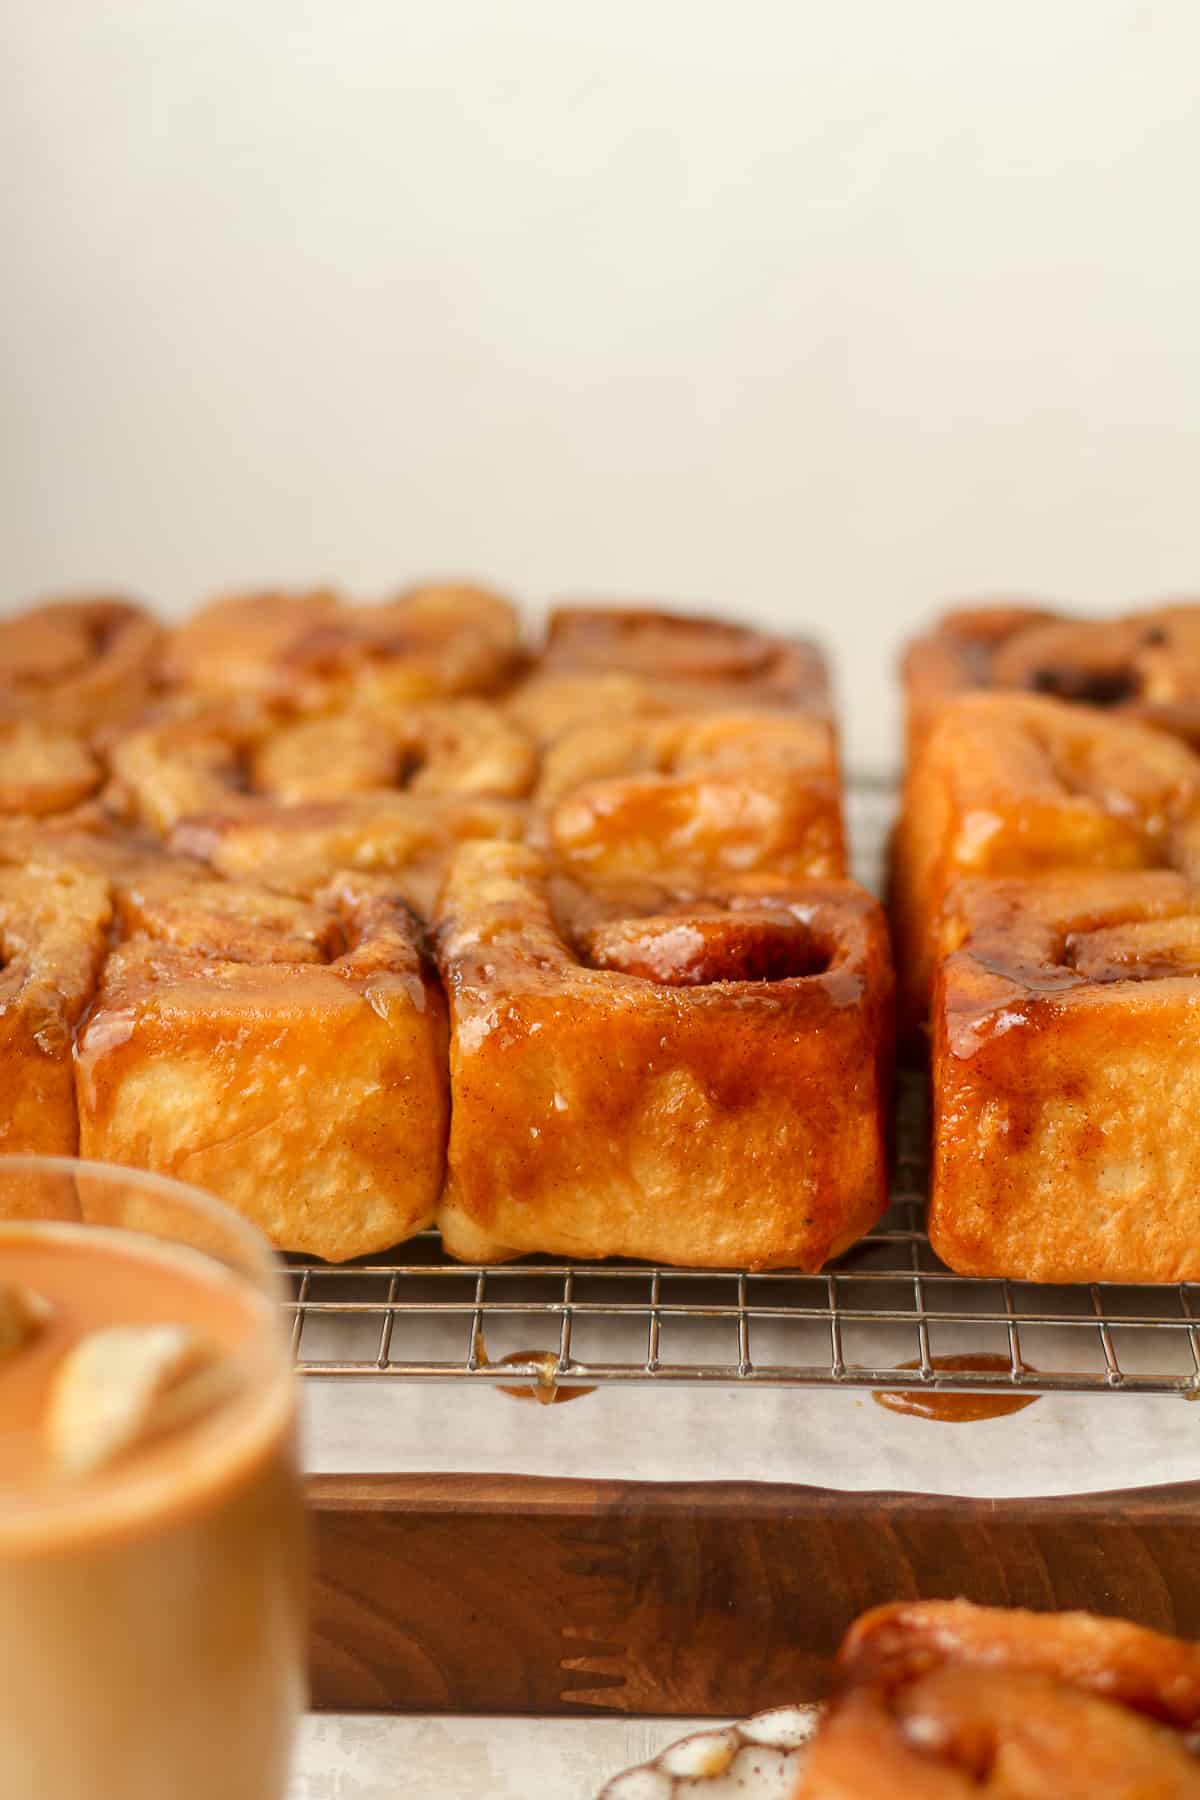 Side view of the baked caramel rolls.